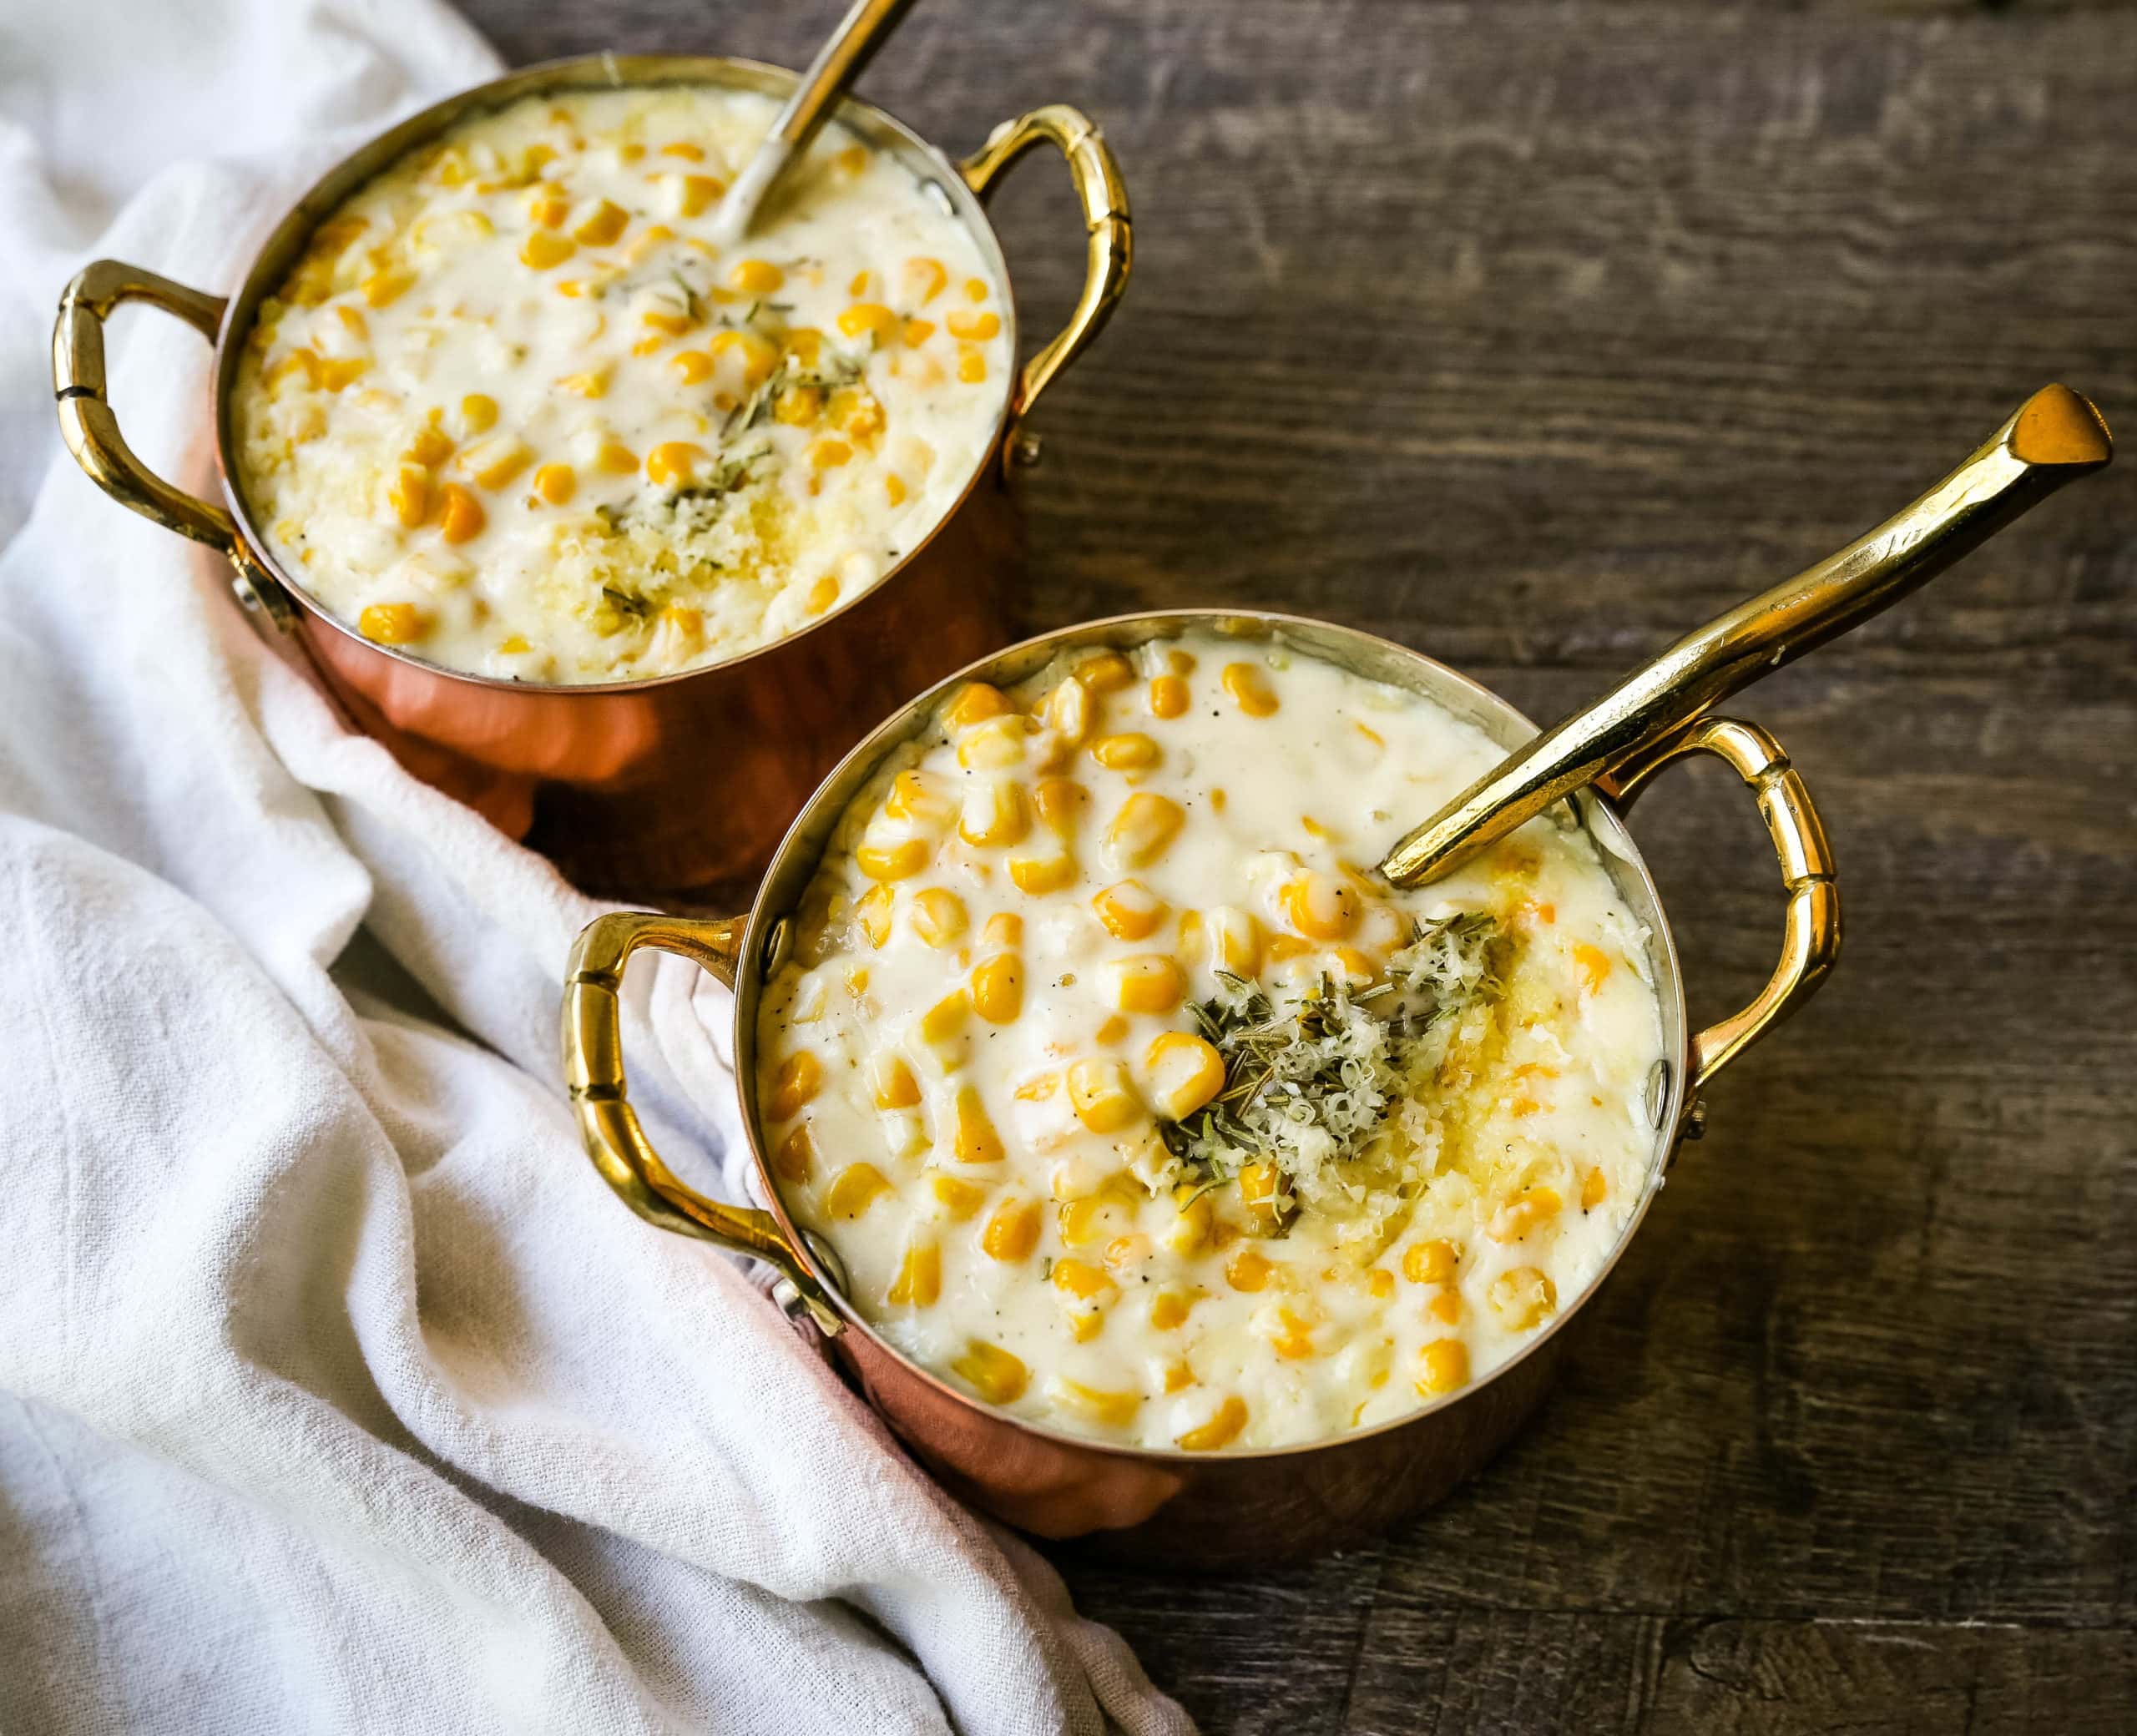 How to make the best creamed corn. A creamy corn recipe made with heavy cream, butter, corn, parmesan cheese, a touch of sugar and salt. A popular side dish or Thanksgiving side dish recipe. www.modernhoney.com #corn #creamedcorn #gullliverscorn #sidedish #thanksgiving